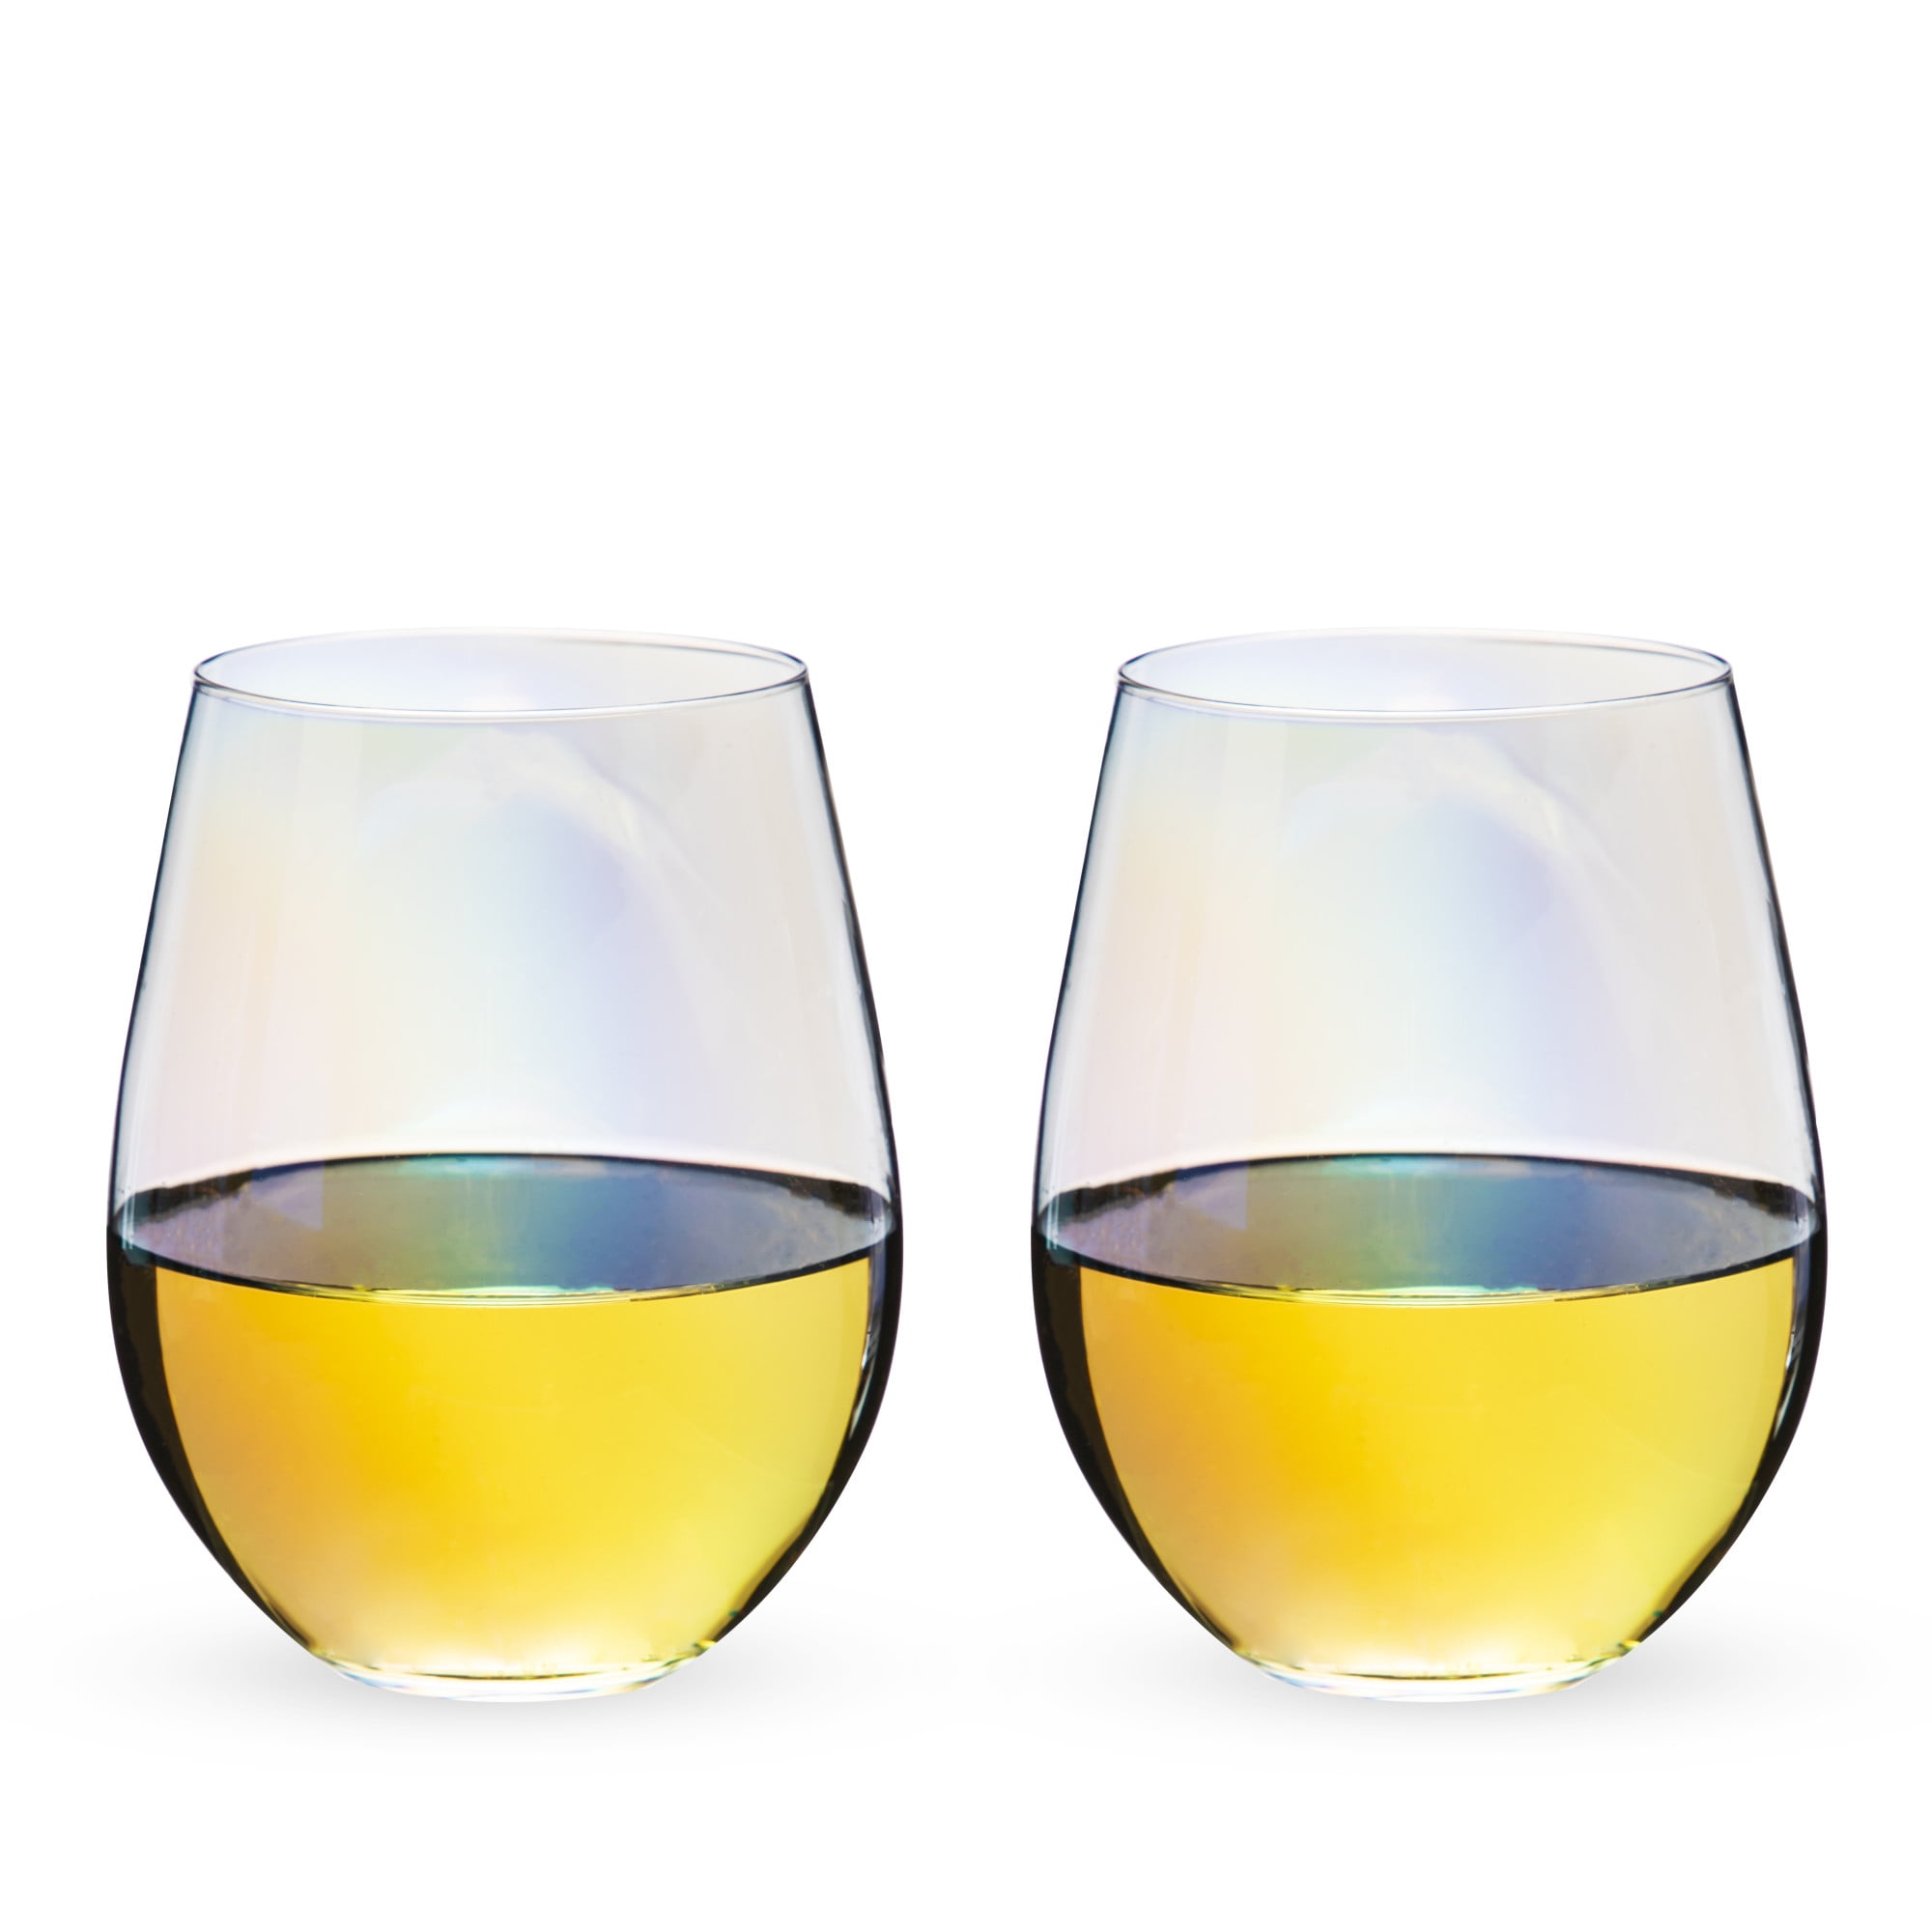 DIAMANTE Stemless Wine Glasses Pair ‘Moda’, stemless Gin Glass –  Undecorated Crystal White Wine Glasses with No Stem – Box of 2